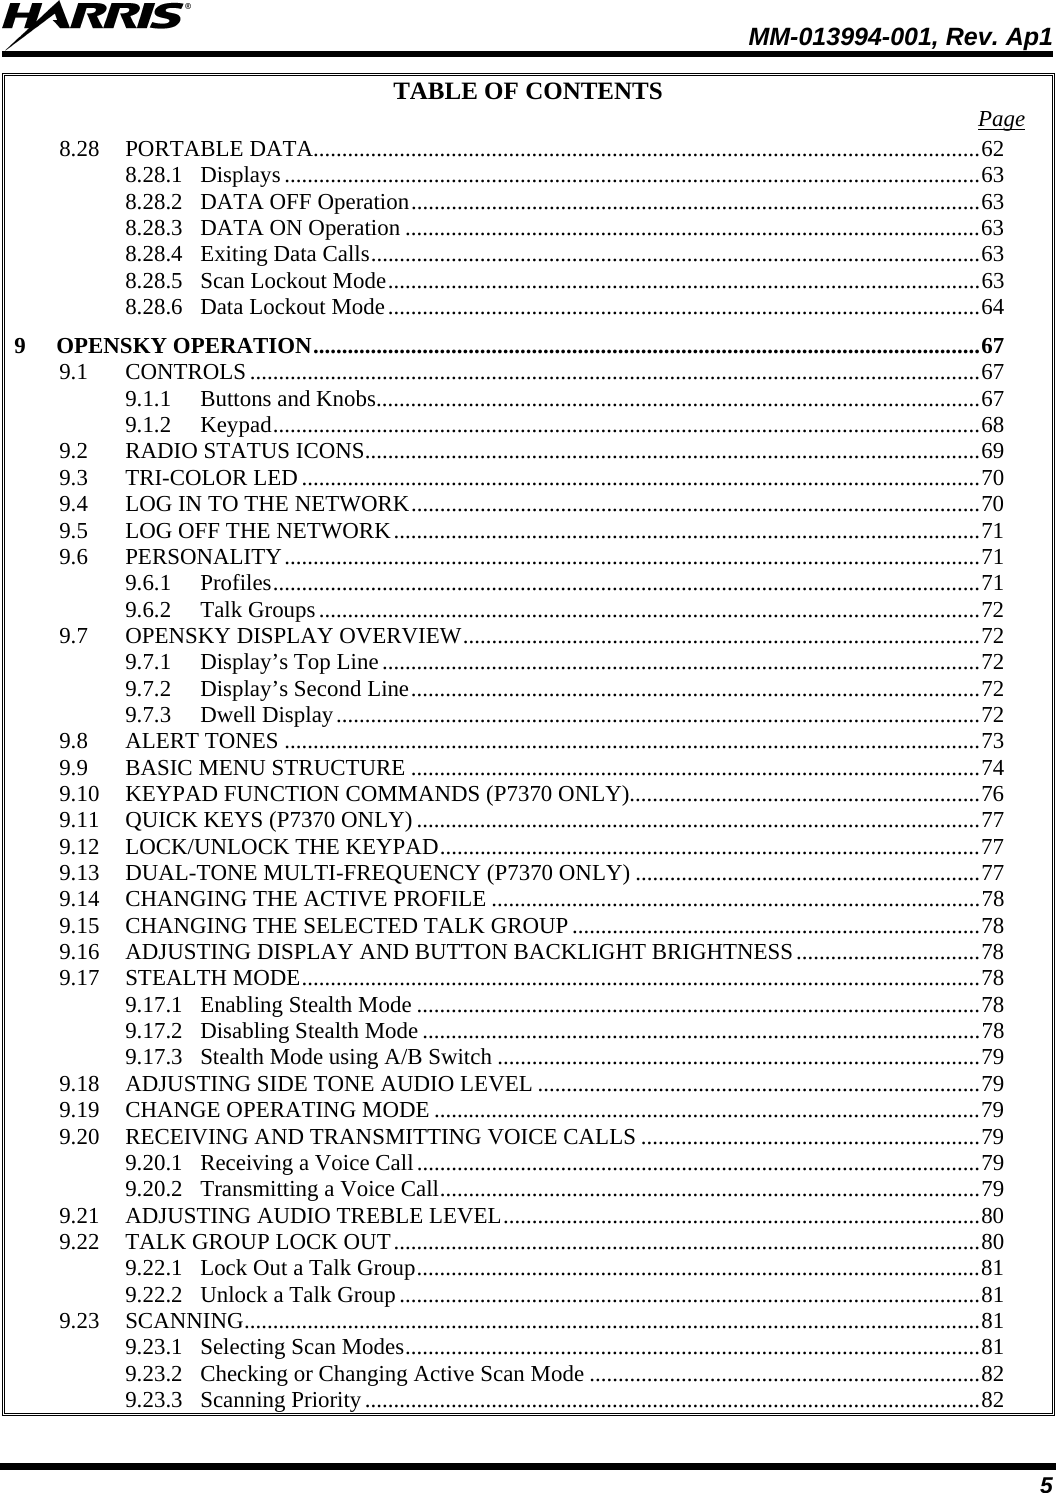  MM-013994-001, Rev. Ap1 5 TABLE OF CONTENTS  Page 8.28 PORTABLE DATA....................................................................................................................62 8.28.1 Displays .........................................................................................................................63 8.28.2 DATA OFF Operation...................................................................................................63 8.28.3 DATA ON Operation ....................................................................................................63 8.28.4 Exiting Data Calls..........................................................................................................63 8.28.5 Scan Lockout Mode.......................................................................................................63 8.28.6 Data Lockout Mode.......................................................................................................64 9 OPENSKY OPERATION....................................................................................................................67 9.1 CONTROLS...............................................................................................................................67 9.1.1 Buttons and Knobs.........................................................................................................67 9.1.2 Keypad...........................................................................................................................68 9.2 RADIO STATUS ICONS...........................................................................................................69 9.3 TRI-COLOR LED......................................................................................................................70 9.4 LOG IN TO THE NETWORK...................................................................................................70 9.5 LOG OFF THE NETWORK......................................................................................................71 9.6 PERSONALITY.........................................................................................................................71 9.6.1 Profiles...........................................................................................................................71 9.6.2 Talk Groups...................................................................................................................72 9.7 OPENSKY DISPLAY OVERVIEW..........................................................................................72 9.7.1 Display’s Top Line........................................................................................................72 9.7.2 Display’s Second Line...................................................................................................72 9.7.3 Dwell Display................................................................................................................72 9.8 ALERT TONES .........................................................................................................................73 9.9 BASIC MENU STRUCTURE ...................................................................................................74 9.10 KEYPAD FUNCTION COMMANDS (P7370 ONLY).............................................................76 9.11 QUICK KEYS (P7370 ONLY) ..................................................................................................77 9.12 LOCK/UNLOCK THE KEYPAD..............................................................................................77 9.13 DUAL-TONE MULTI-FREQUENCY (P7370 ONLY) ............................................................77 9.14 CHANGING THE ACTIVE PROFILE .....................................................................................78 9.15 CHANGING THE SELECTED TALK GROUP.......................................................................78 9.16 ADJUSTING DISPLAY AND BUTTON BACKLIGHT BRIGHTNESS................................78 9.17 STEALTH MODE......................................................................................................................78 9.17.1 Enabling Stealth Mode ..................................................................................................78 9.17.2 Disabling Stealth Mode .................................................................................................78 9.17.3 Stealth Mode using A/B Switch ....................................................................................79 9.18 ADJUSTING SIDE TONE AUDIO LEVEL .............................................................................79 9.19 CHANGE OPERATING MODE ...............................................................................................79 9.20 RECEIVING AND TRANSMITTING VOICE CALLS ...........................................................79 9.20.1 Receiving a Voice Call..................................................................................................79 9.20.2 Transmitting a Voice Call..............................................................................................79 9.21 ADJUSTING AUDIO TREBLE LEVEL...................................................................................80 9.22 TALK GROUP LOCK OUT......................................................................................................80 9.22.1 Lock Out a Talk Group..................................................................................................81 9.22.2 Unlock a Talk Group.....................................................................................................81 9.23 SCANNING................................................................................................................................81 9.23.1 Selecting Scan Modes....................................................................................................81 9.23.2 Checking or Changing Active Scan Mode ....................................................................82 9.23.3 Scanning Priority...........................................................................................................82 